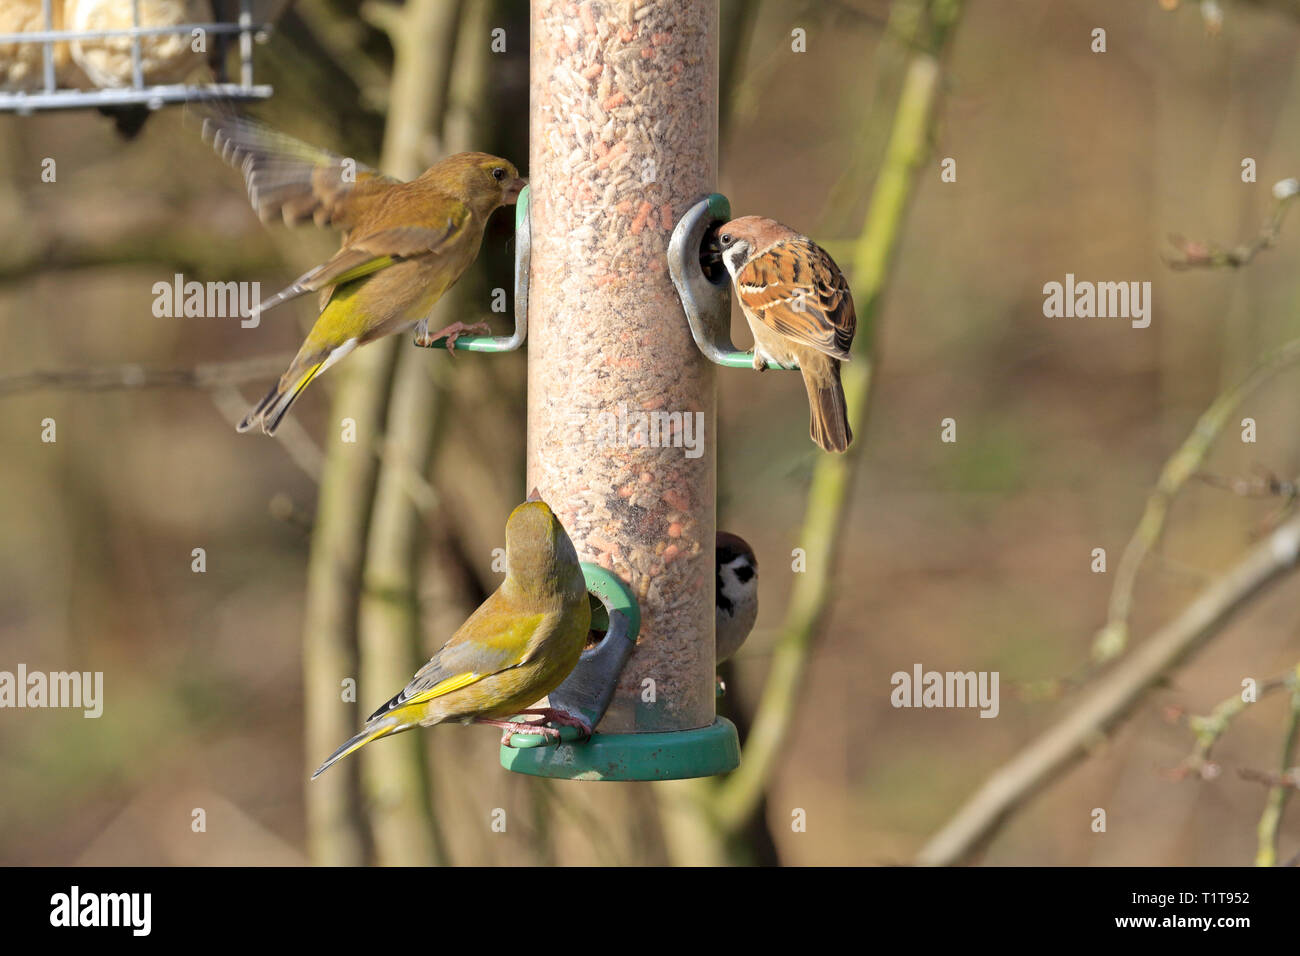 Greenfinch, Carduelis chloris and tree sparrows, Passer montanus on a bird feeder at RSPB reserve Fairburn Ings, Castleford, West Yorkshire, England. Stock Photo